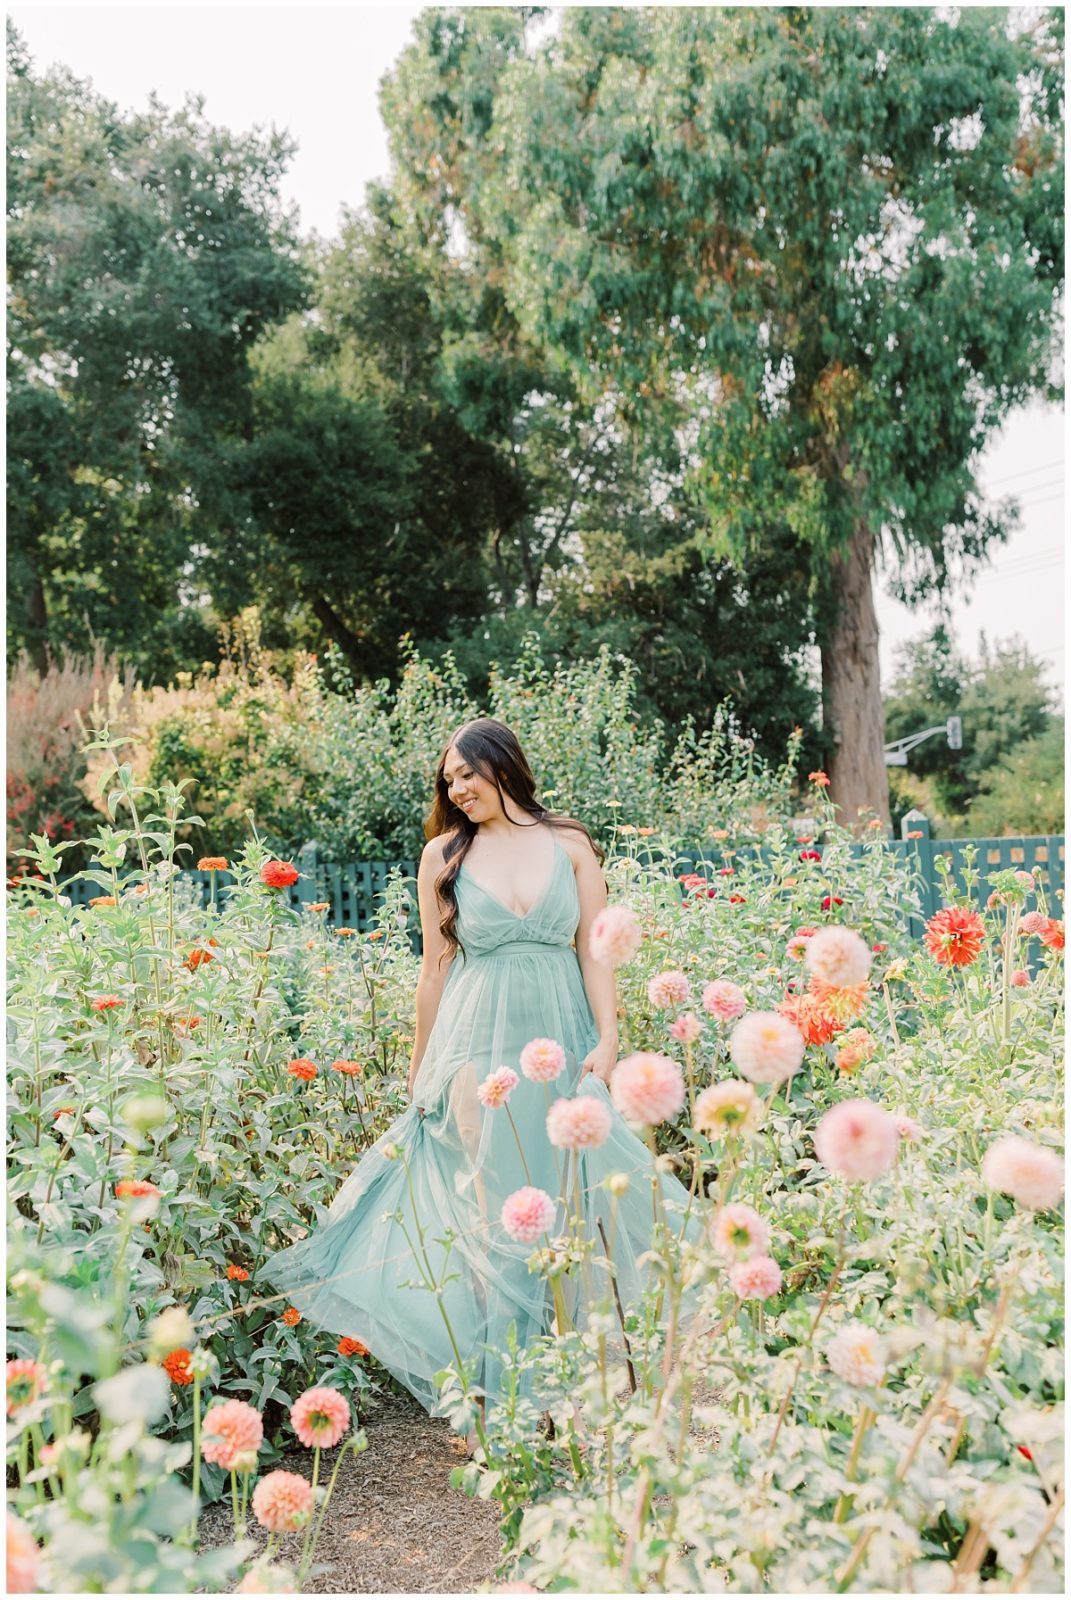 Engagement Session in a Flower Garden